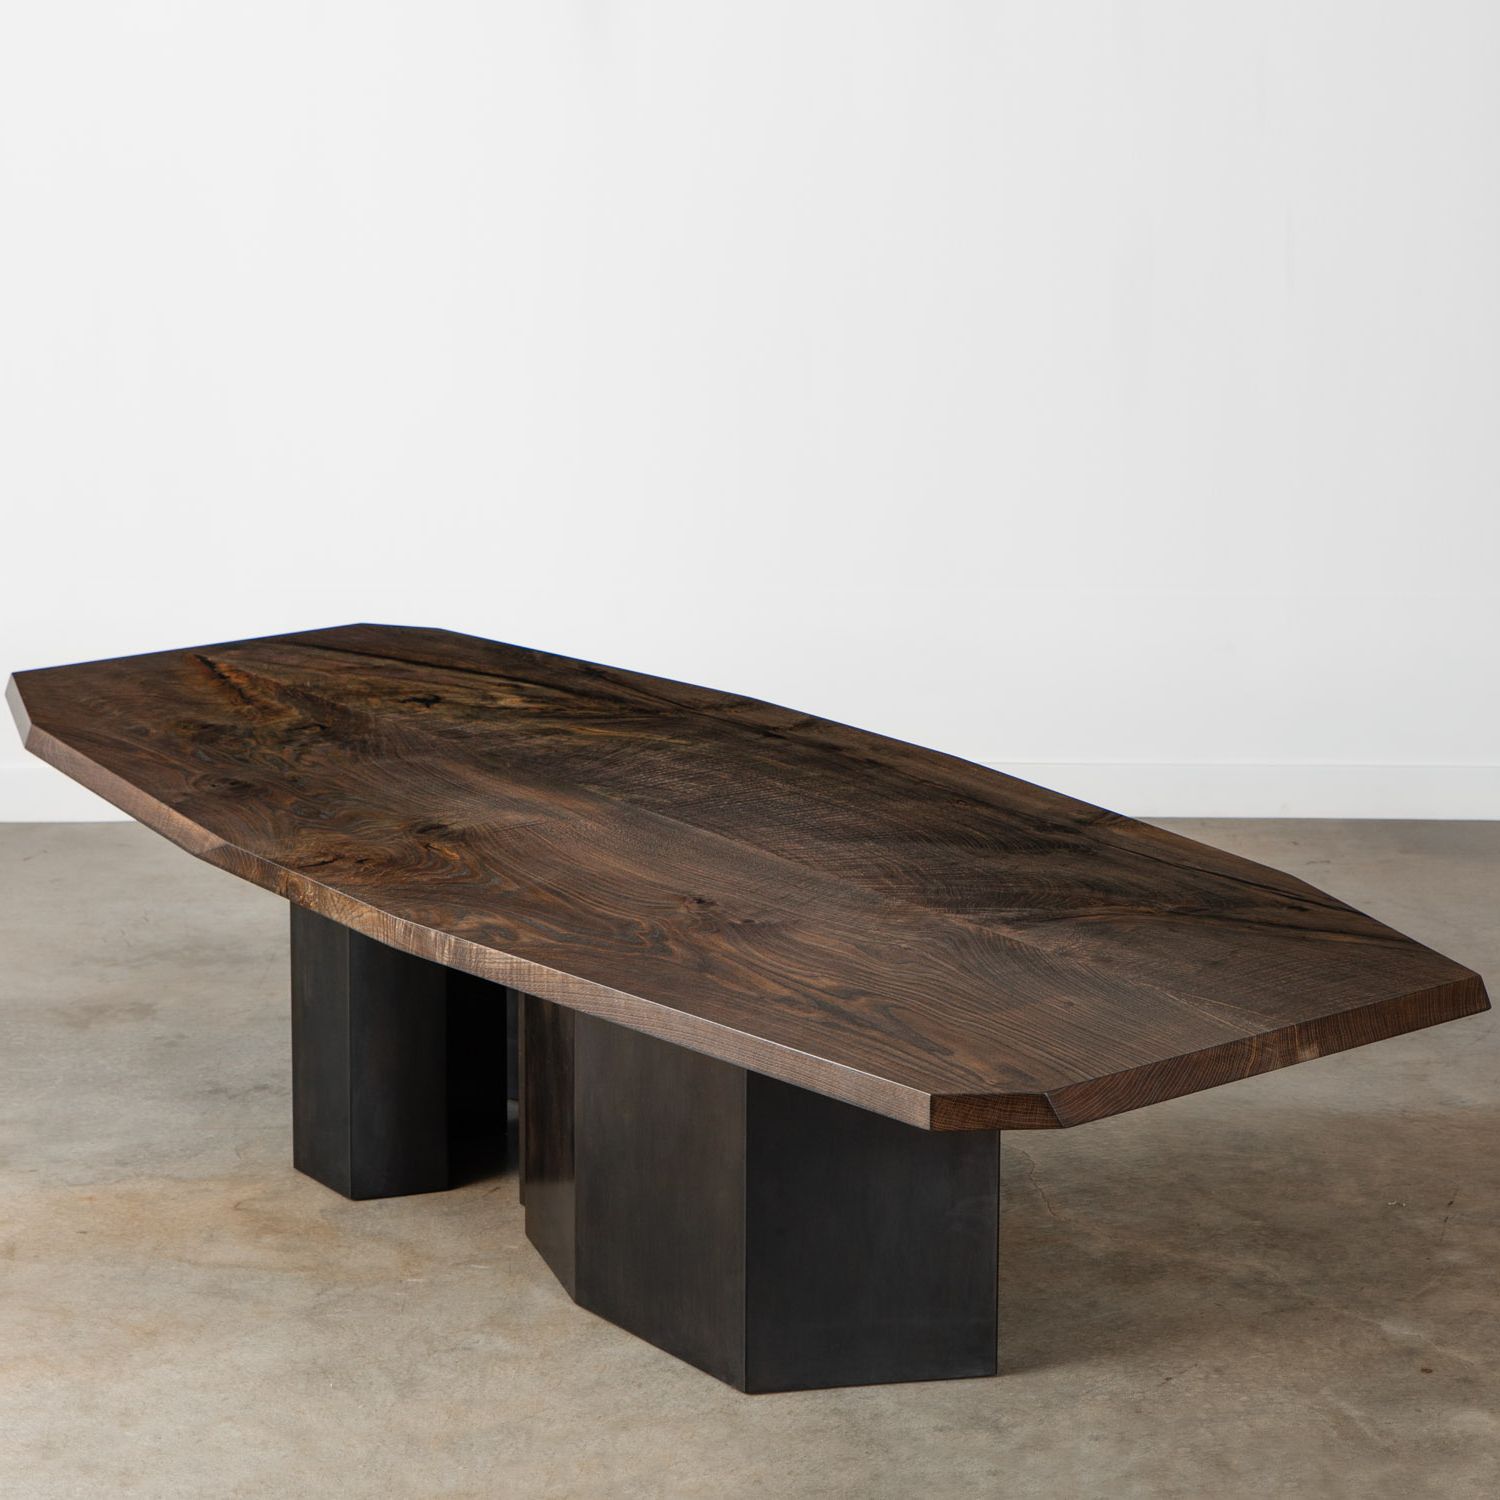 Oxidized Coffee Tables Pertaining To Well Known Oxidized Oak Dining Table No (View 6 of 20)